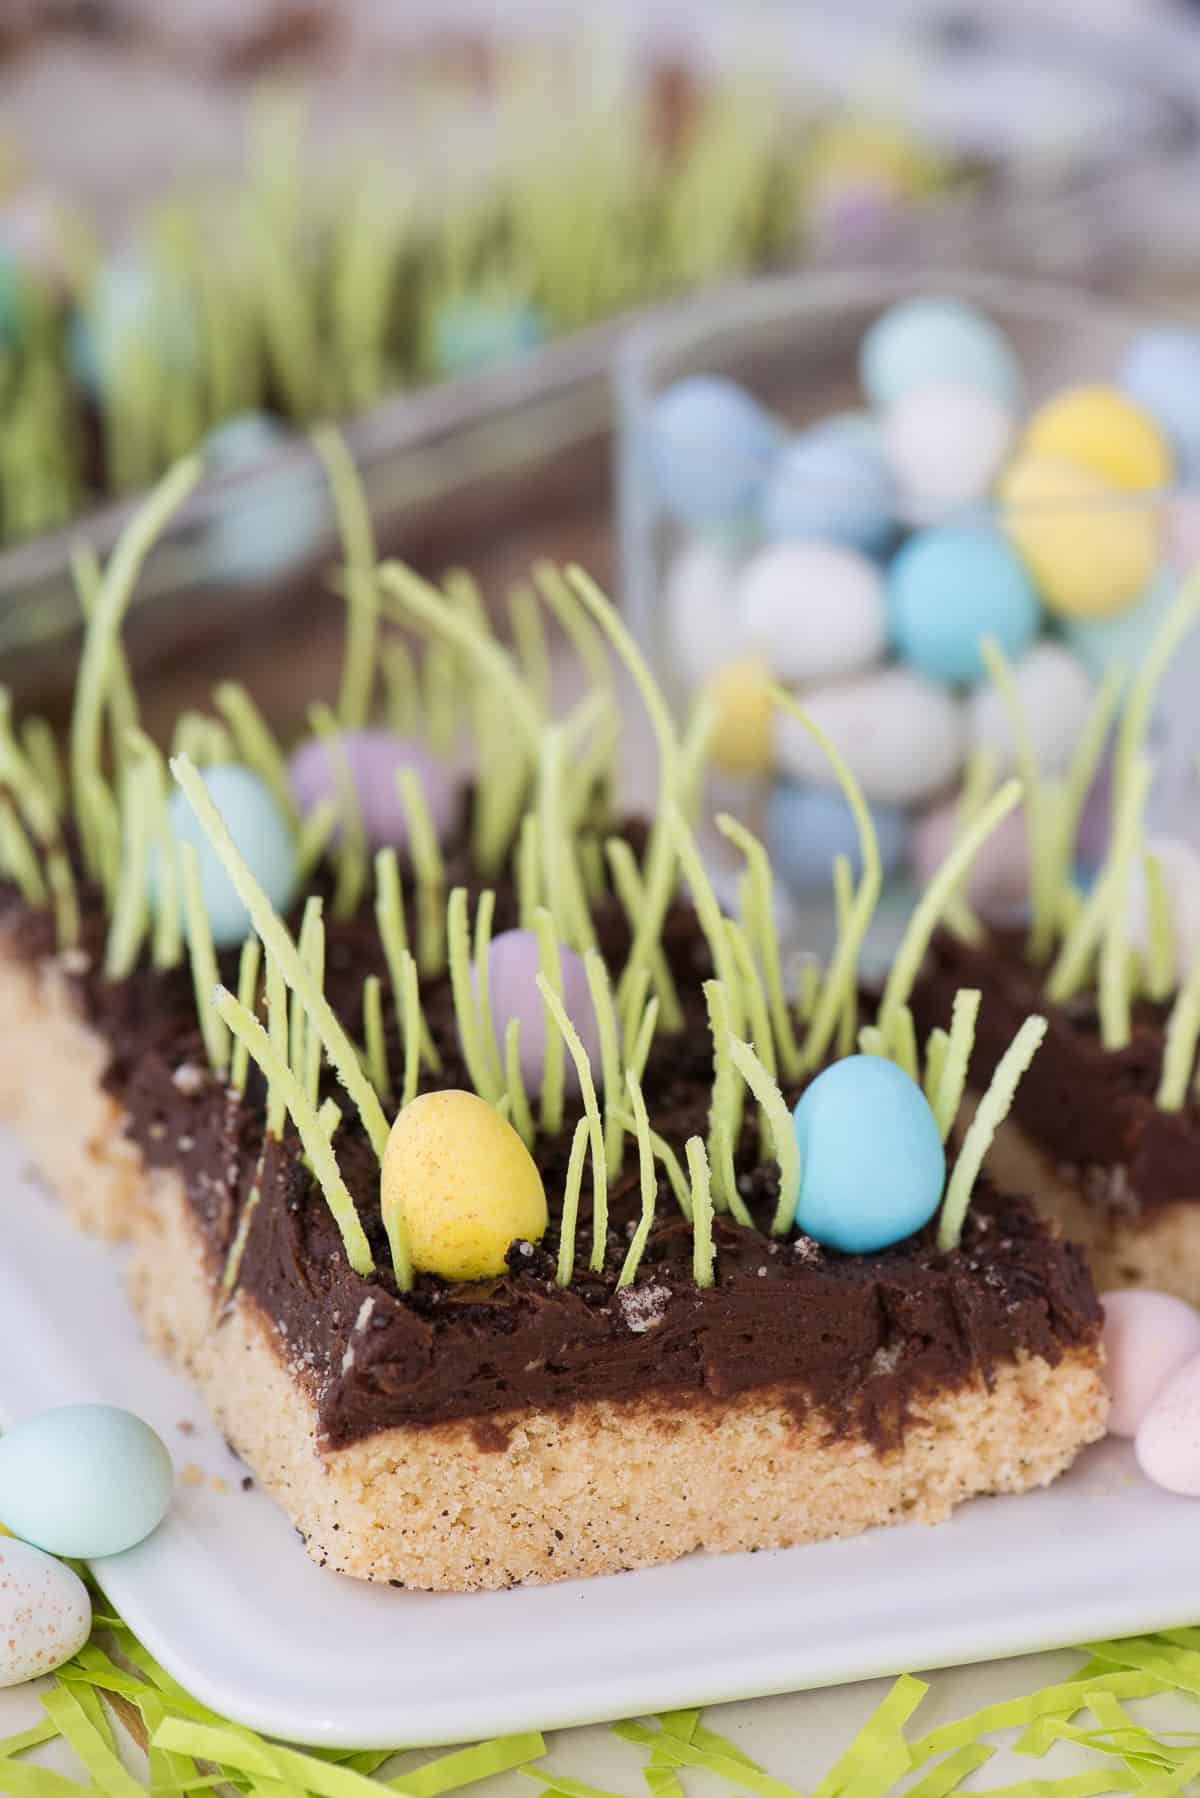 Egg Hunt Sugar Cookie Bars are a fun Easter dessert recipe to make with your kids!